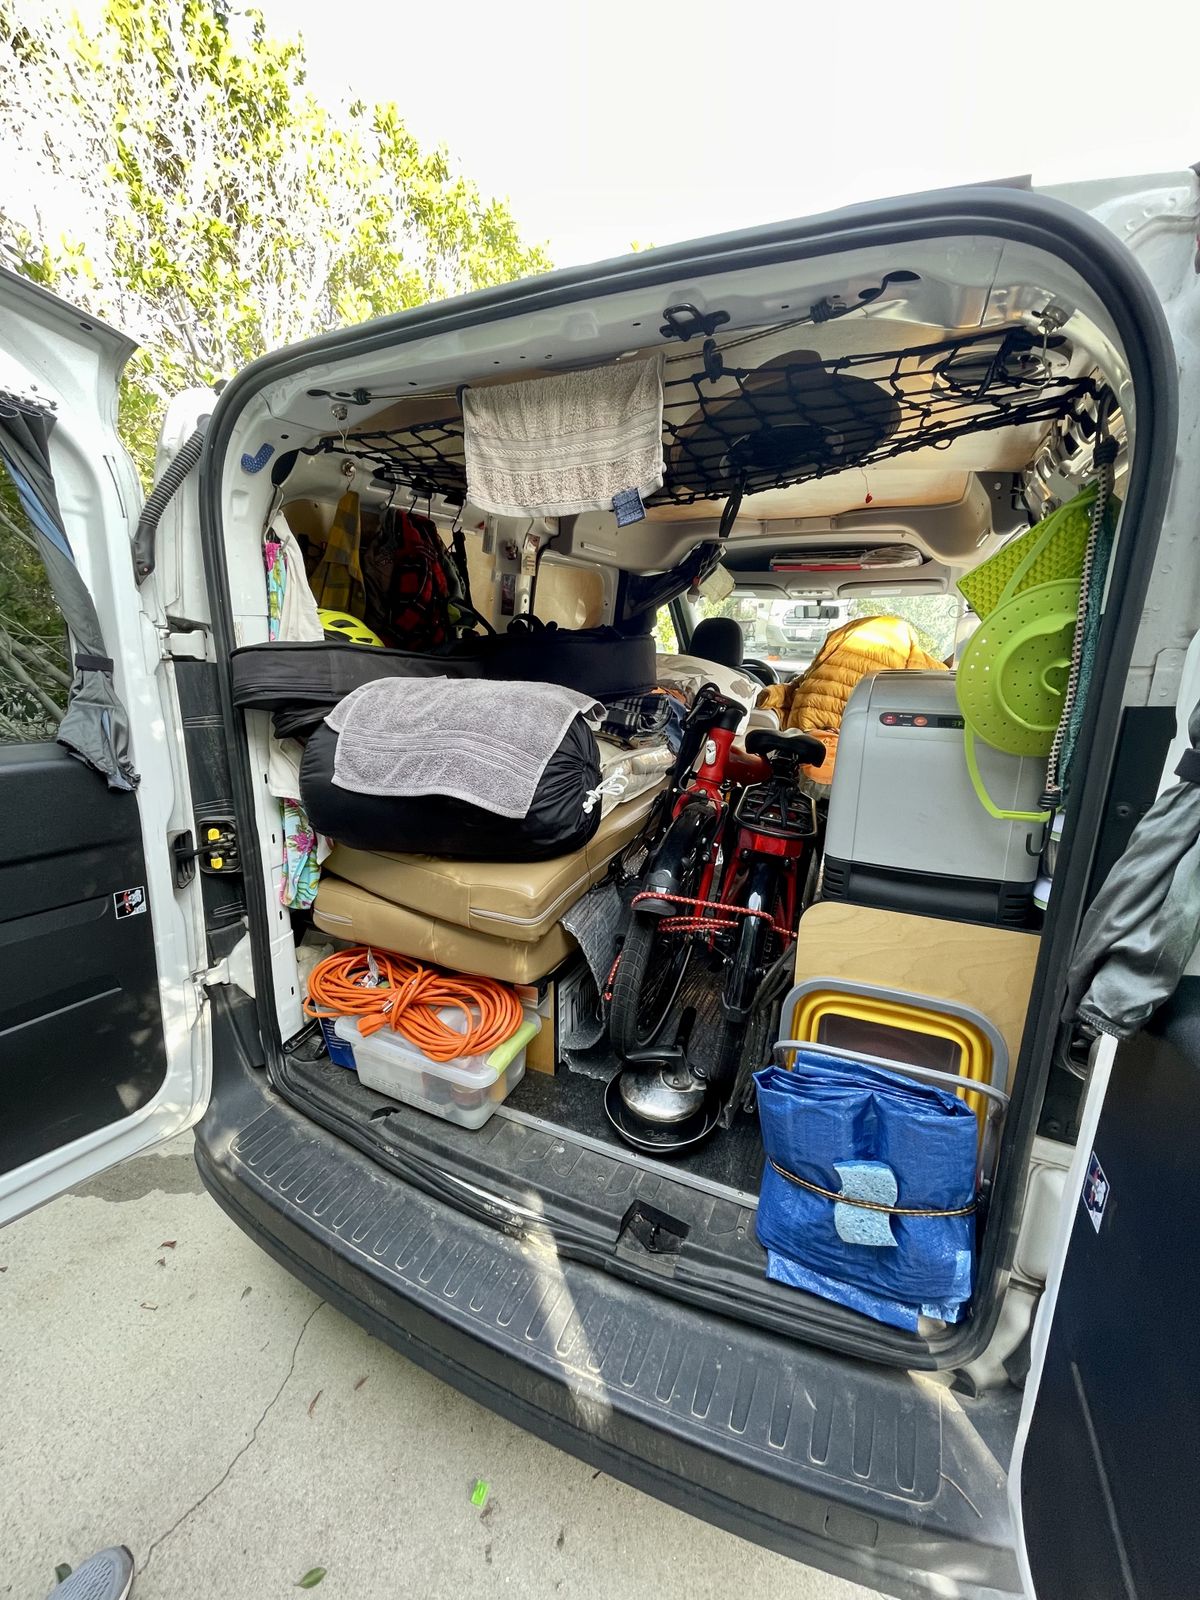 A van conversion helped our neighbor Barbara of Seattle hit the road this year. (Leslie Kelly)